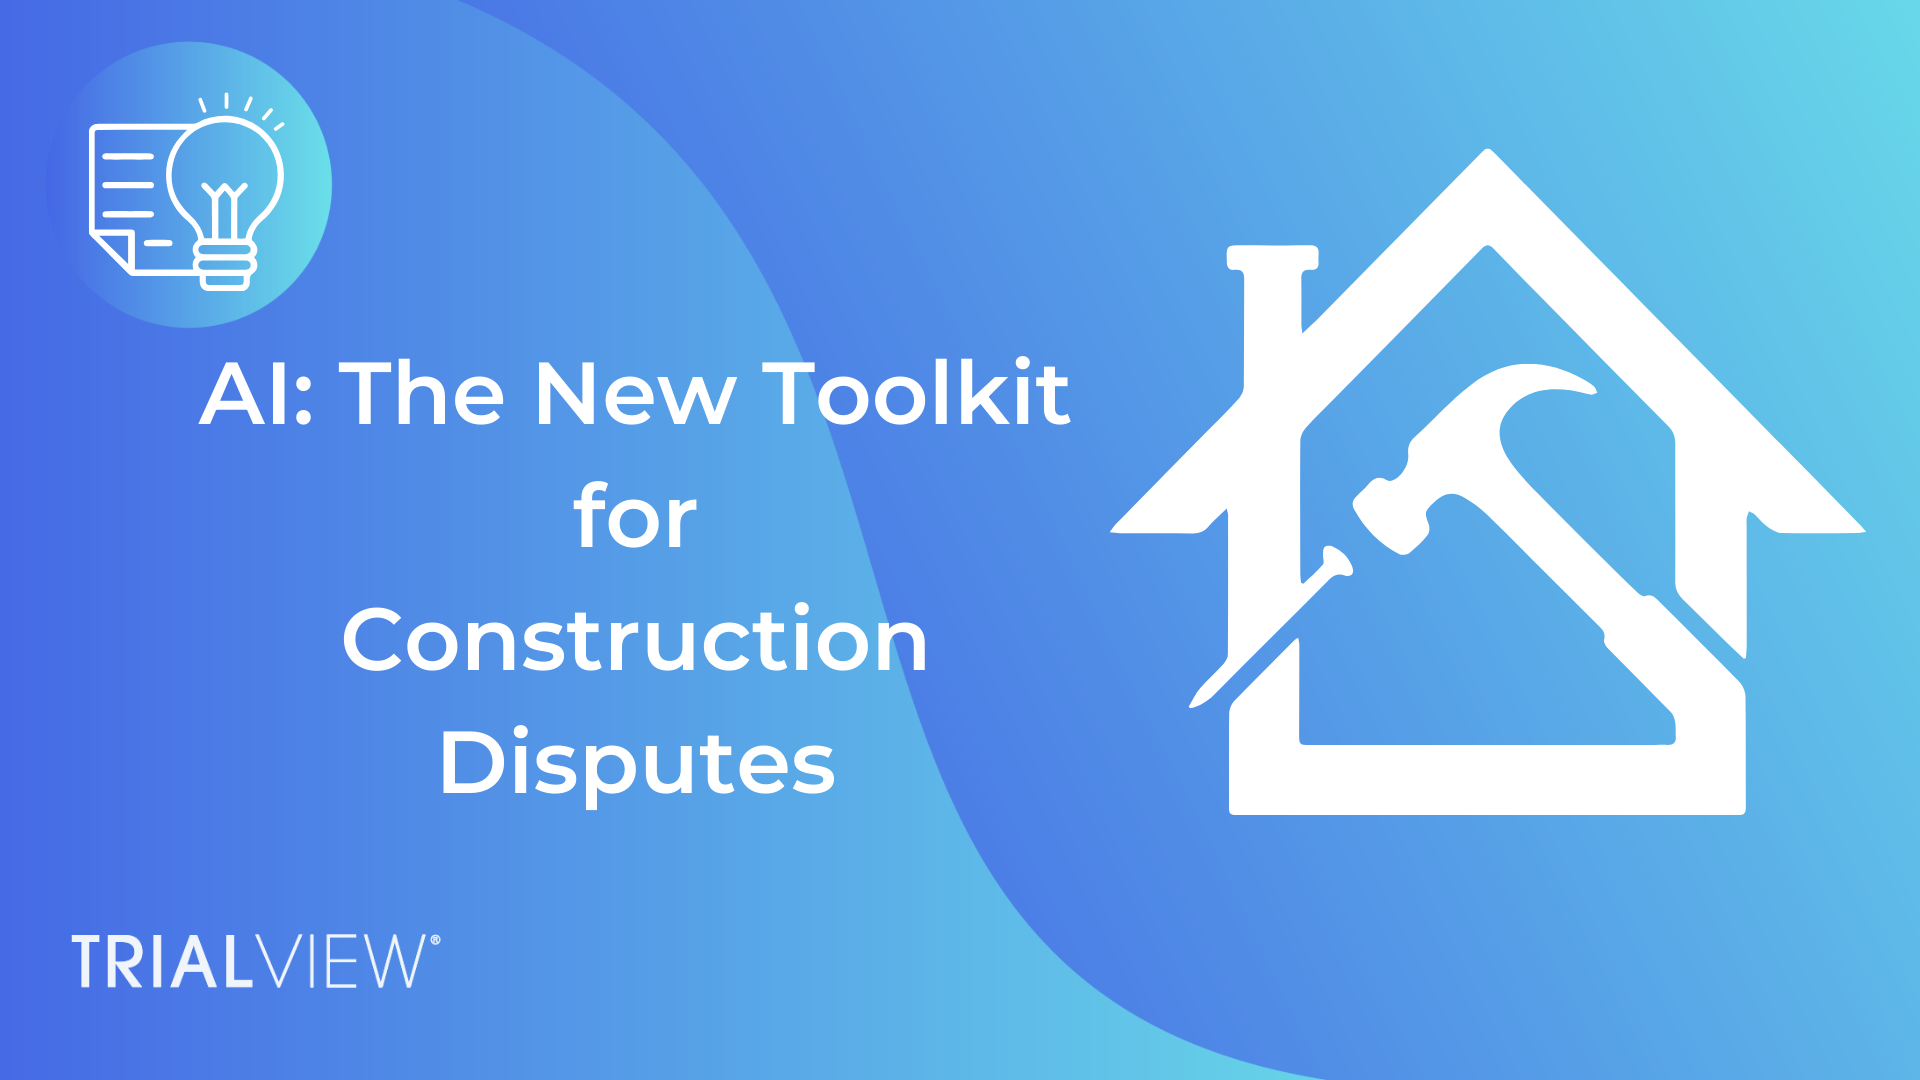 AI: The New Toolkit for Construction Disputes